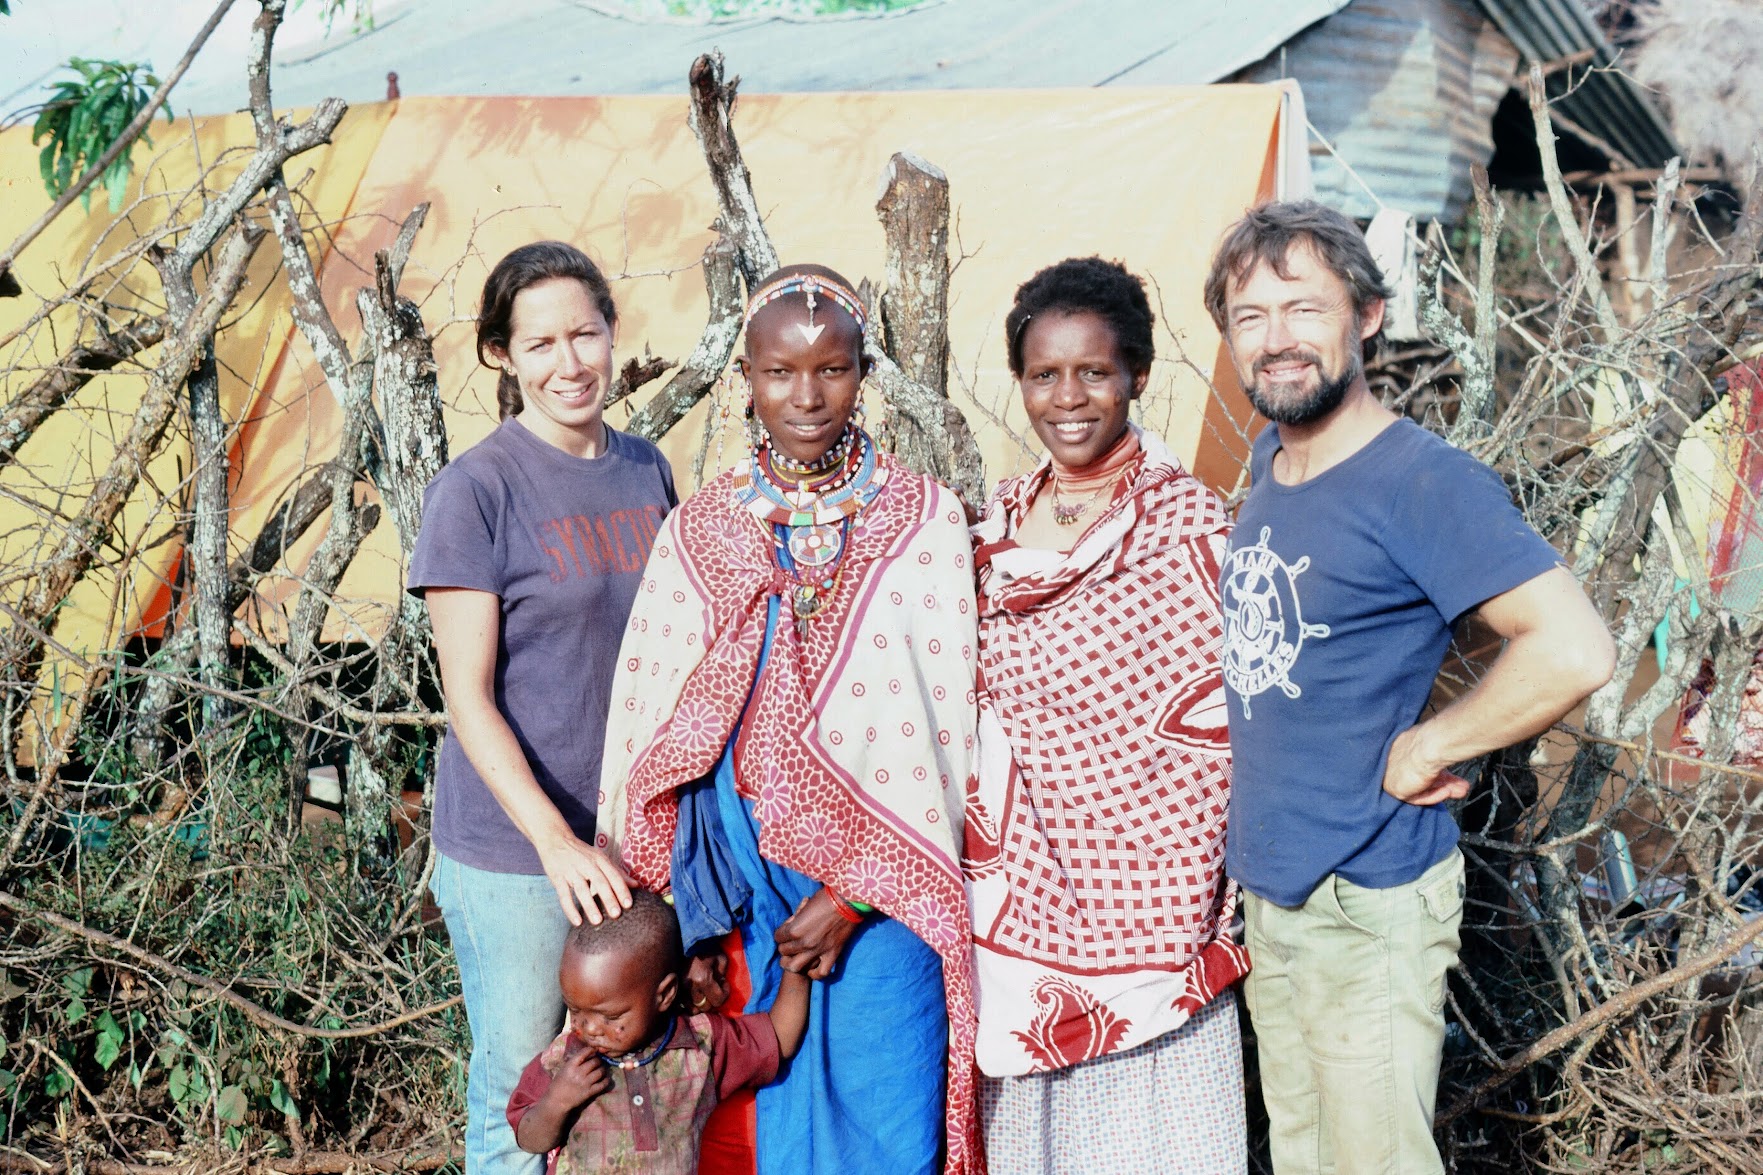 Two Kenyan women and a child stand with Suzanne Grant Lewis and her husband